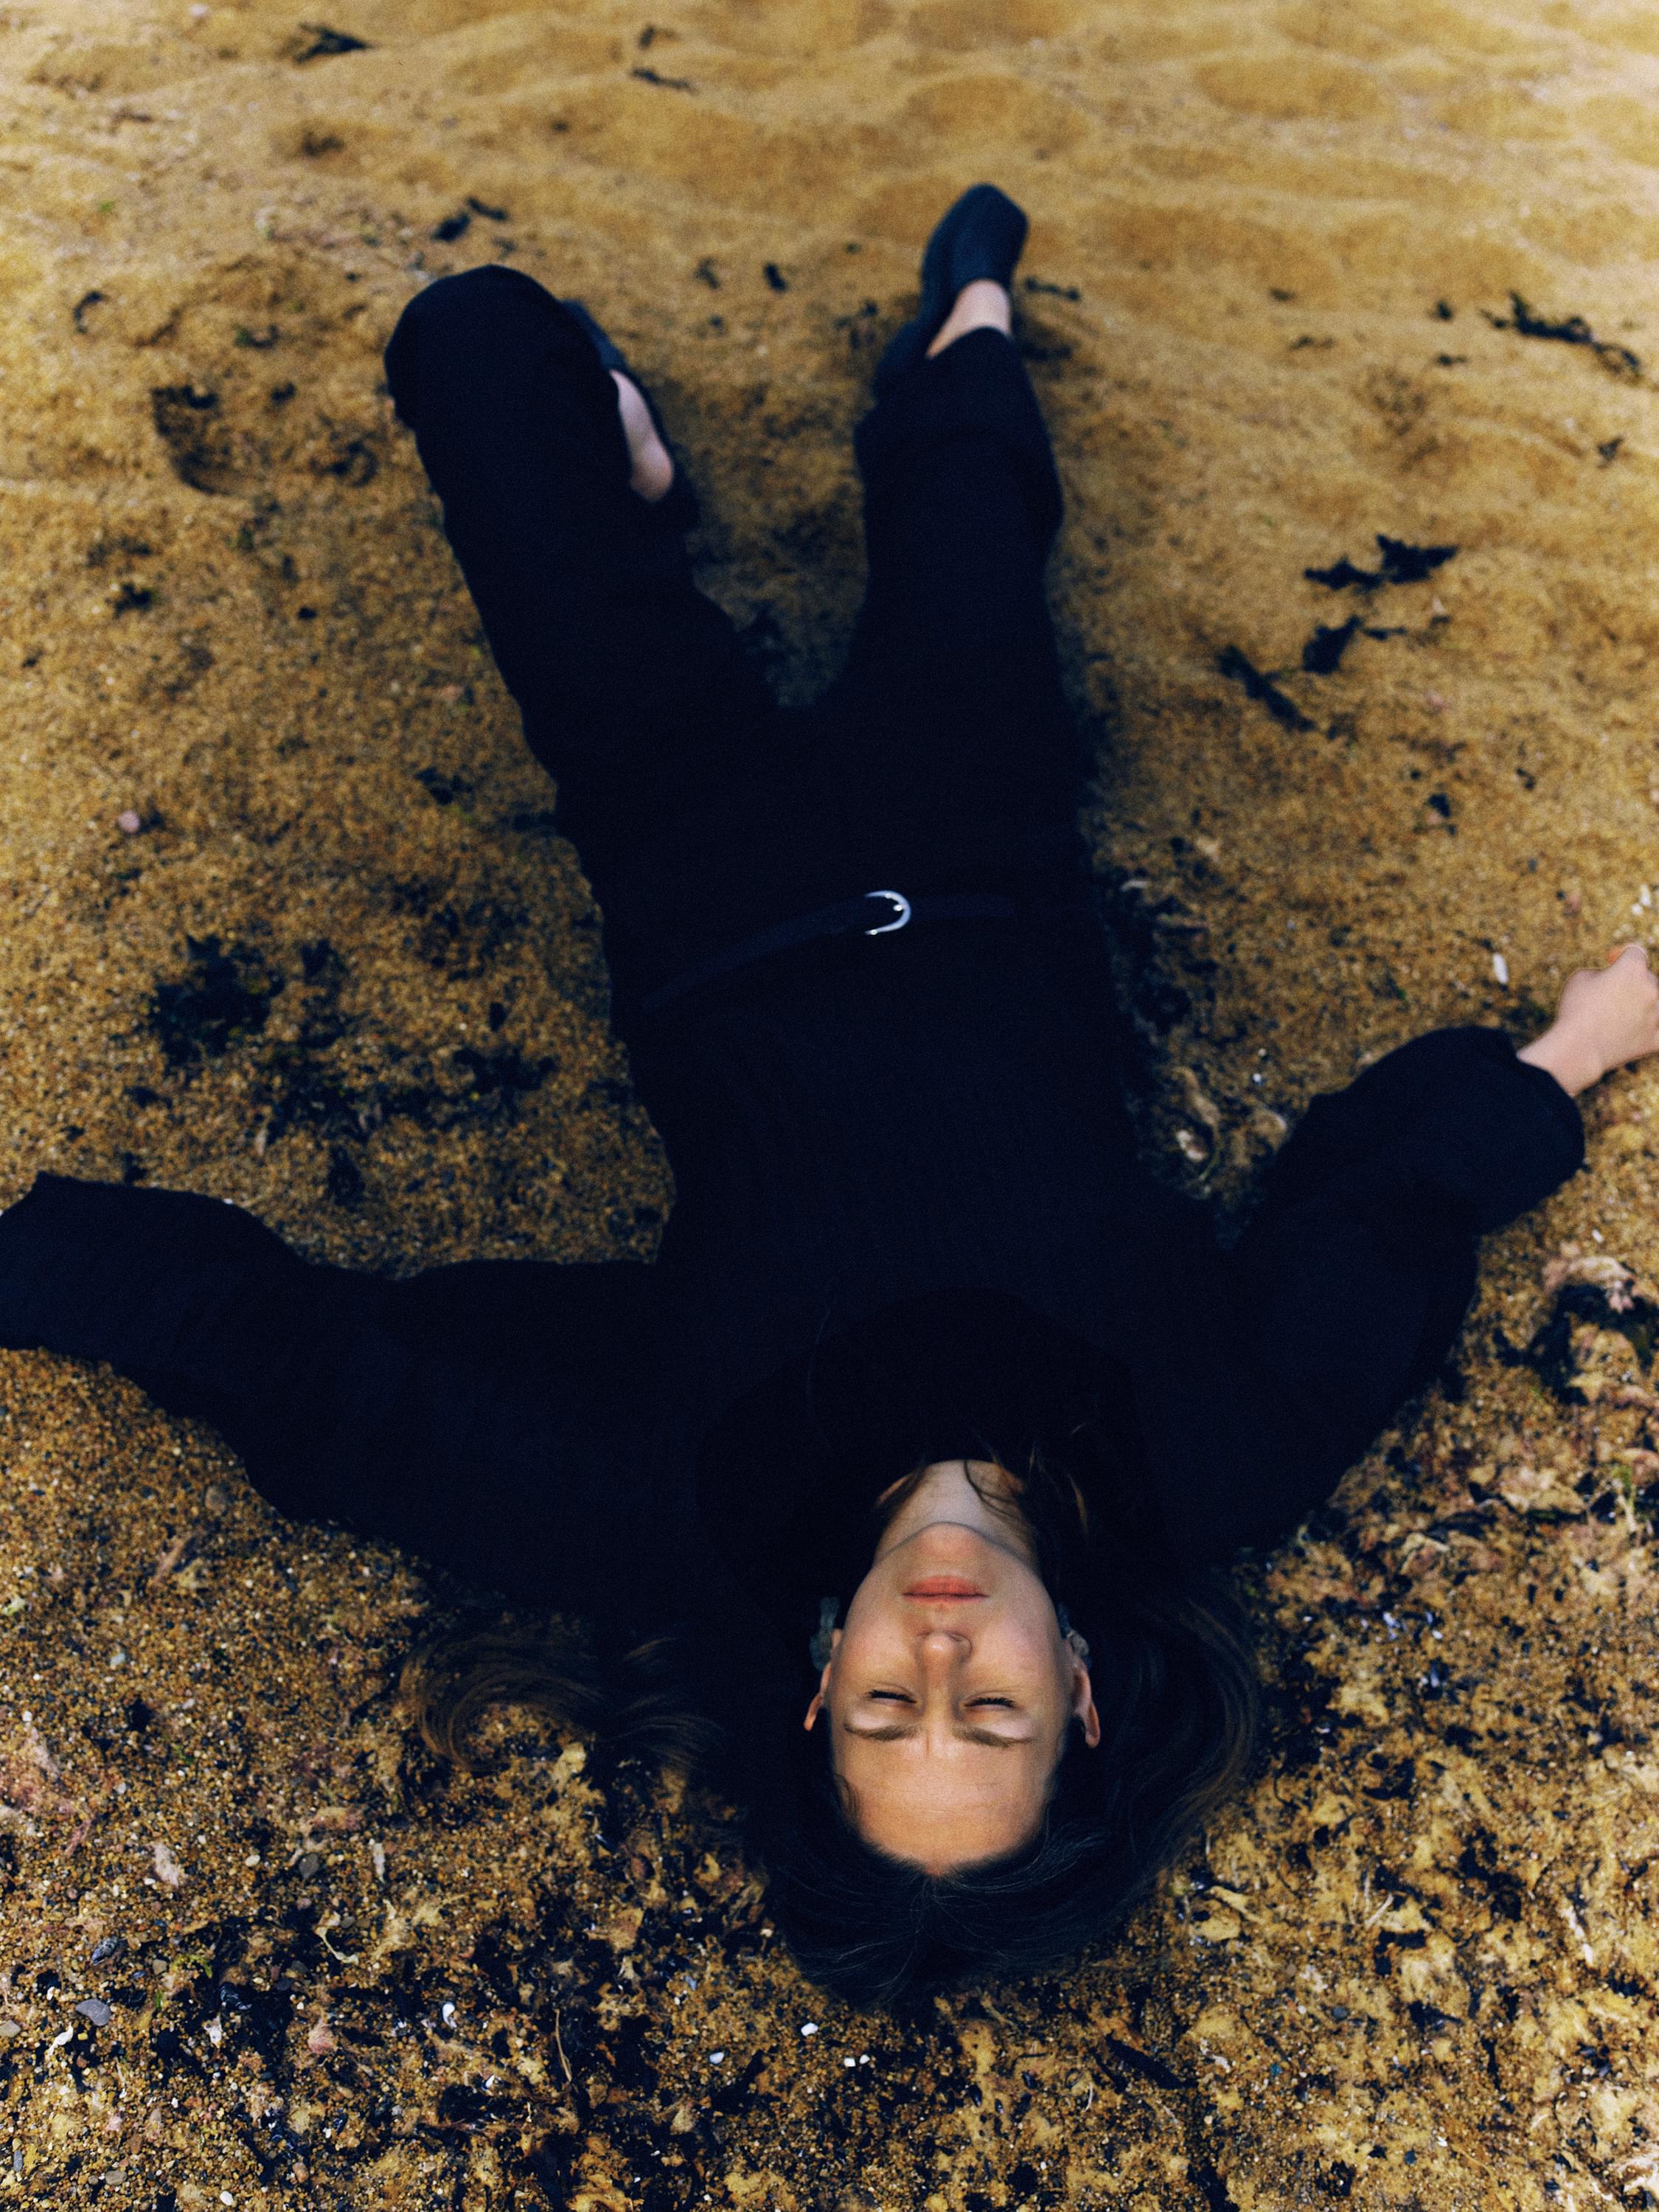 Alice Boman lying flat on the ground, dressed all in black